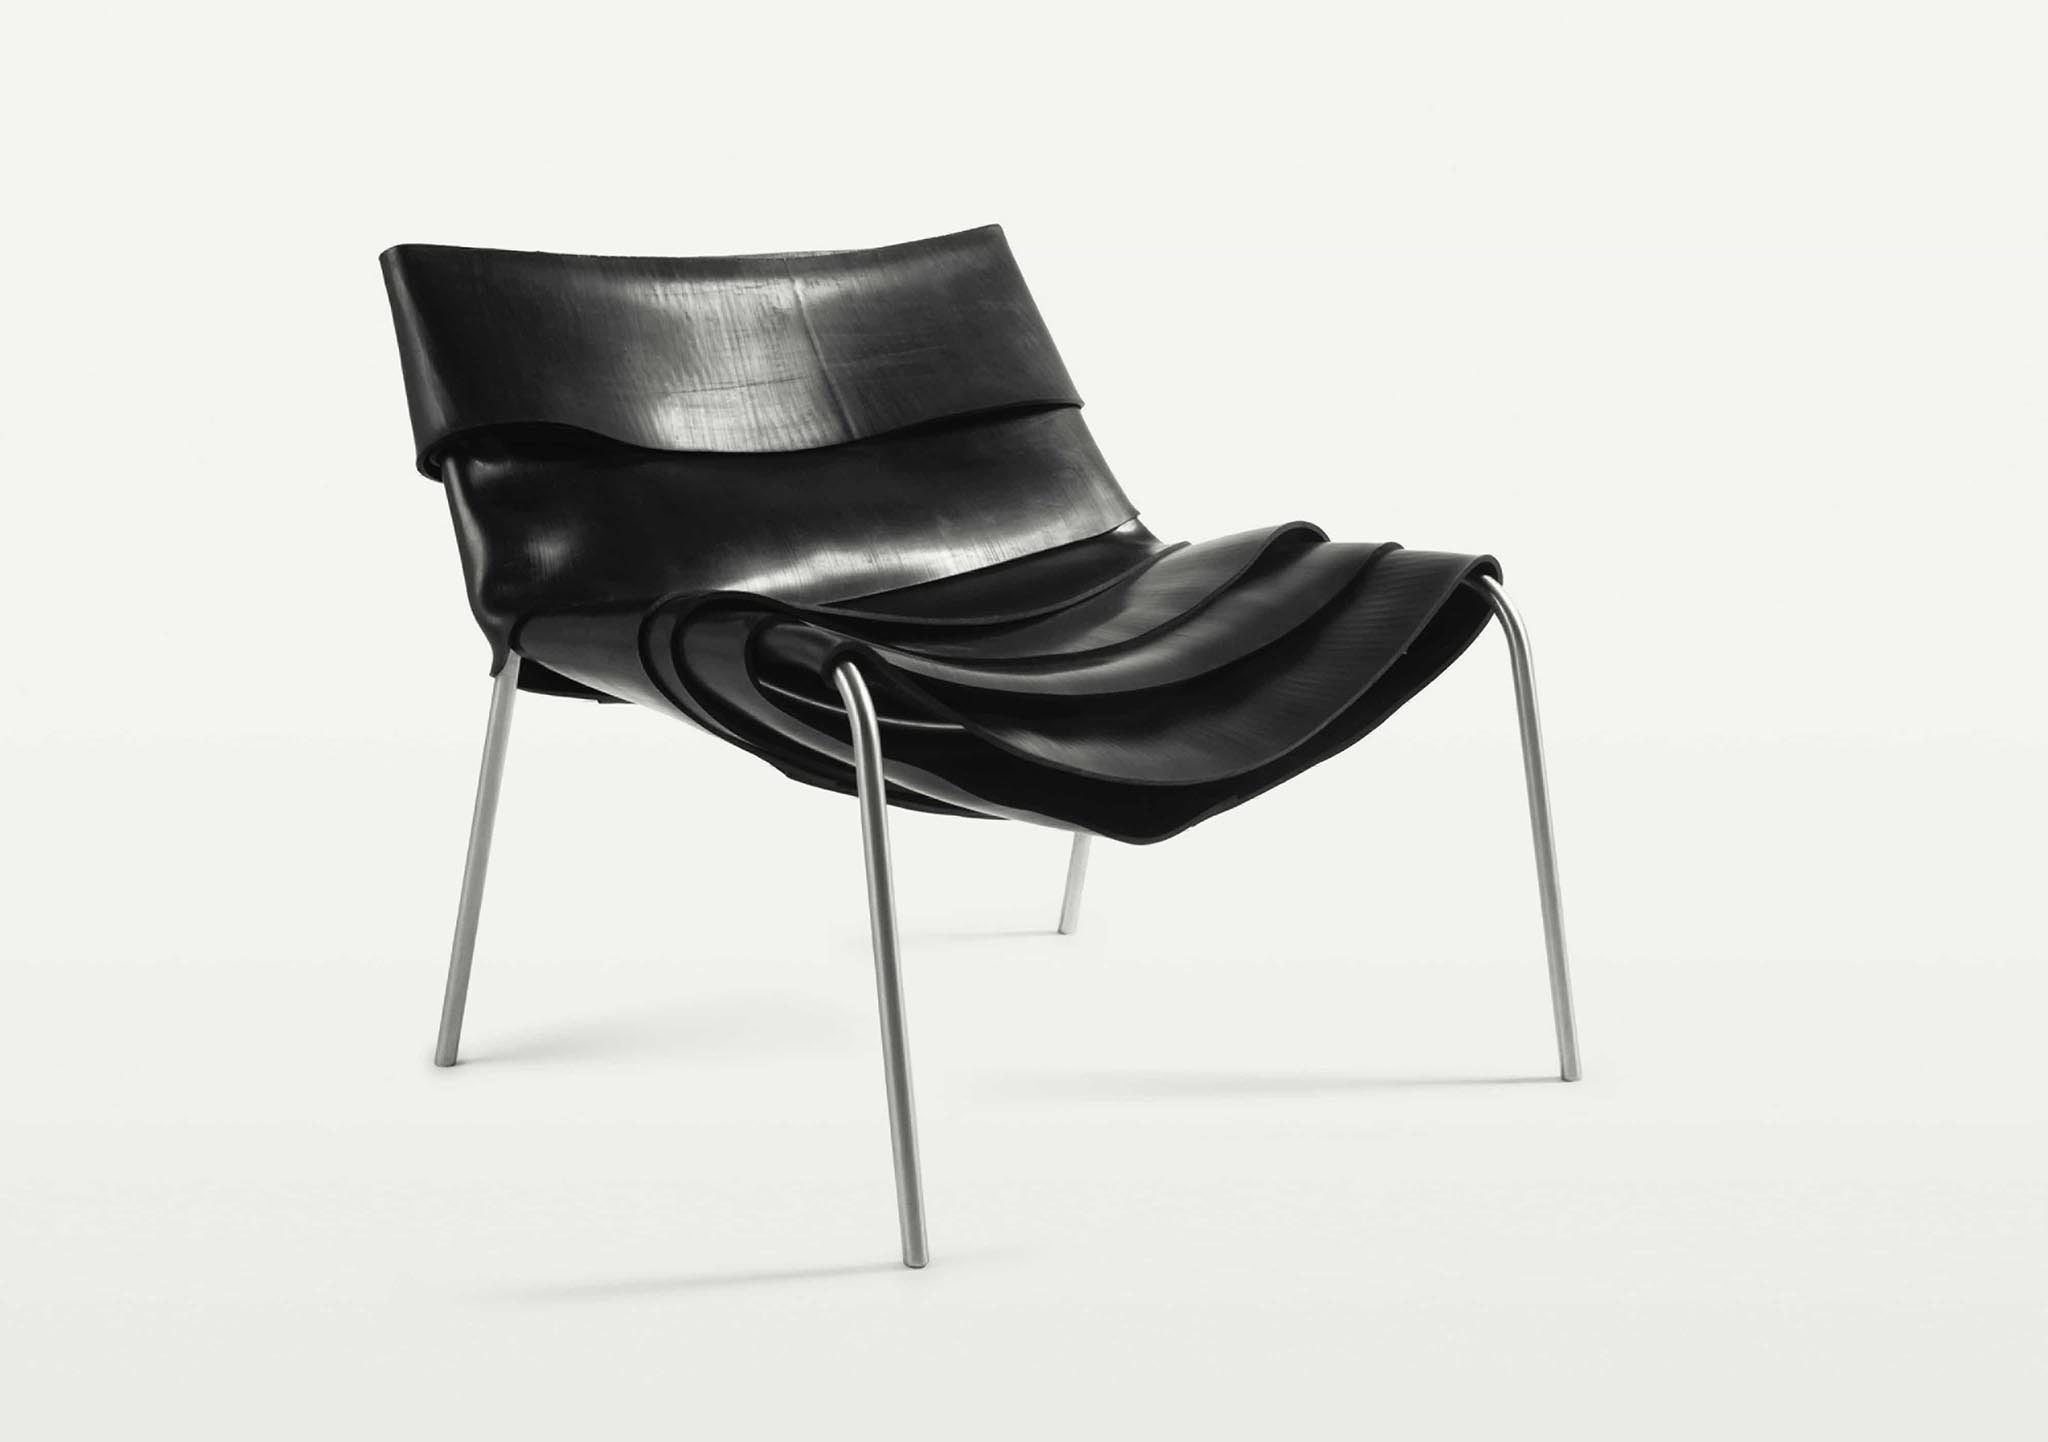 contemporary black leather chair with metal frame by Carol Gay